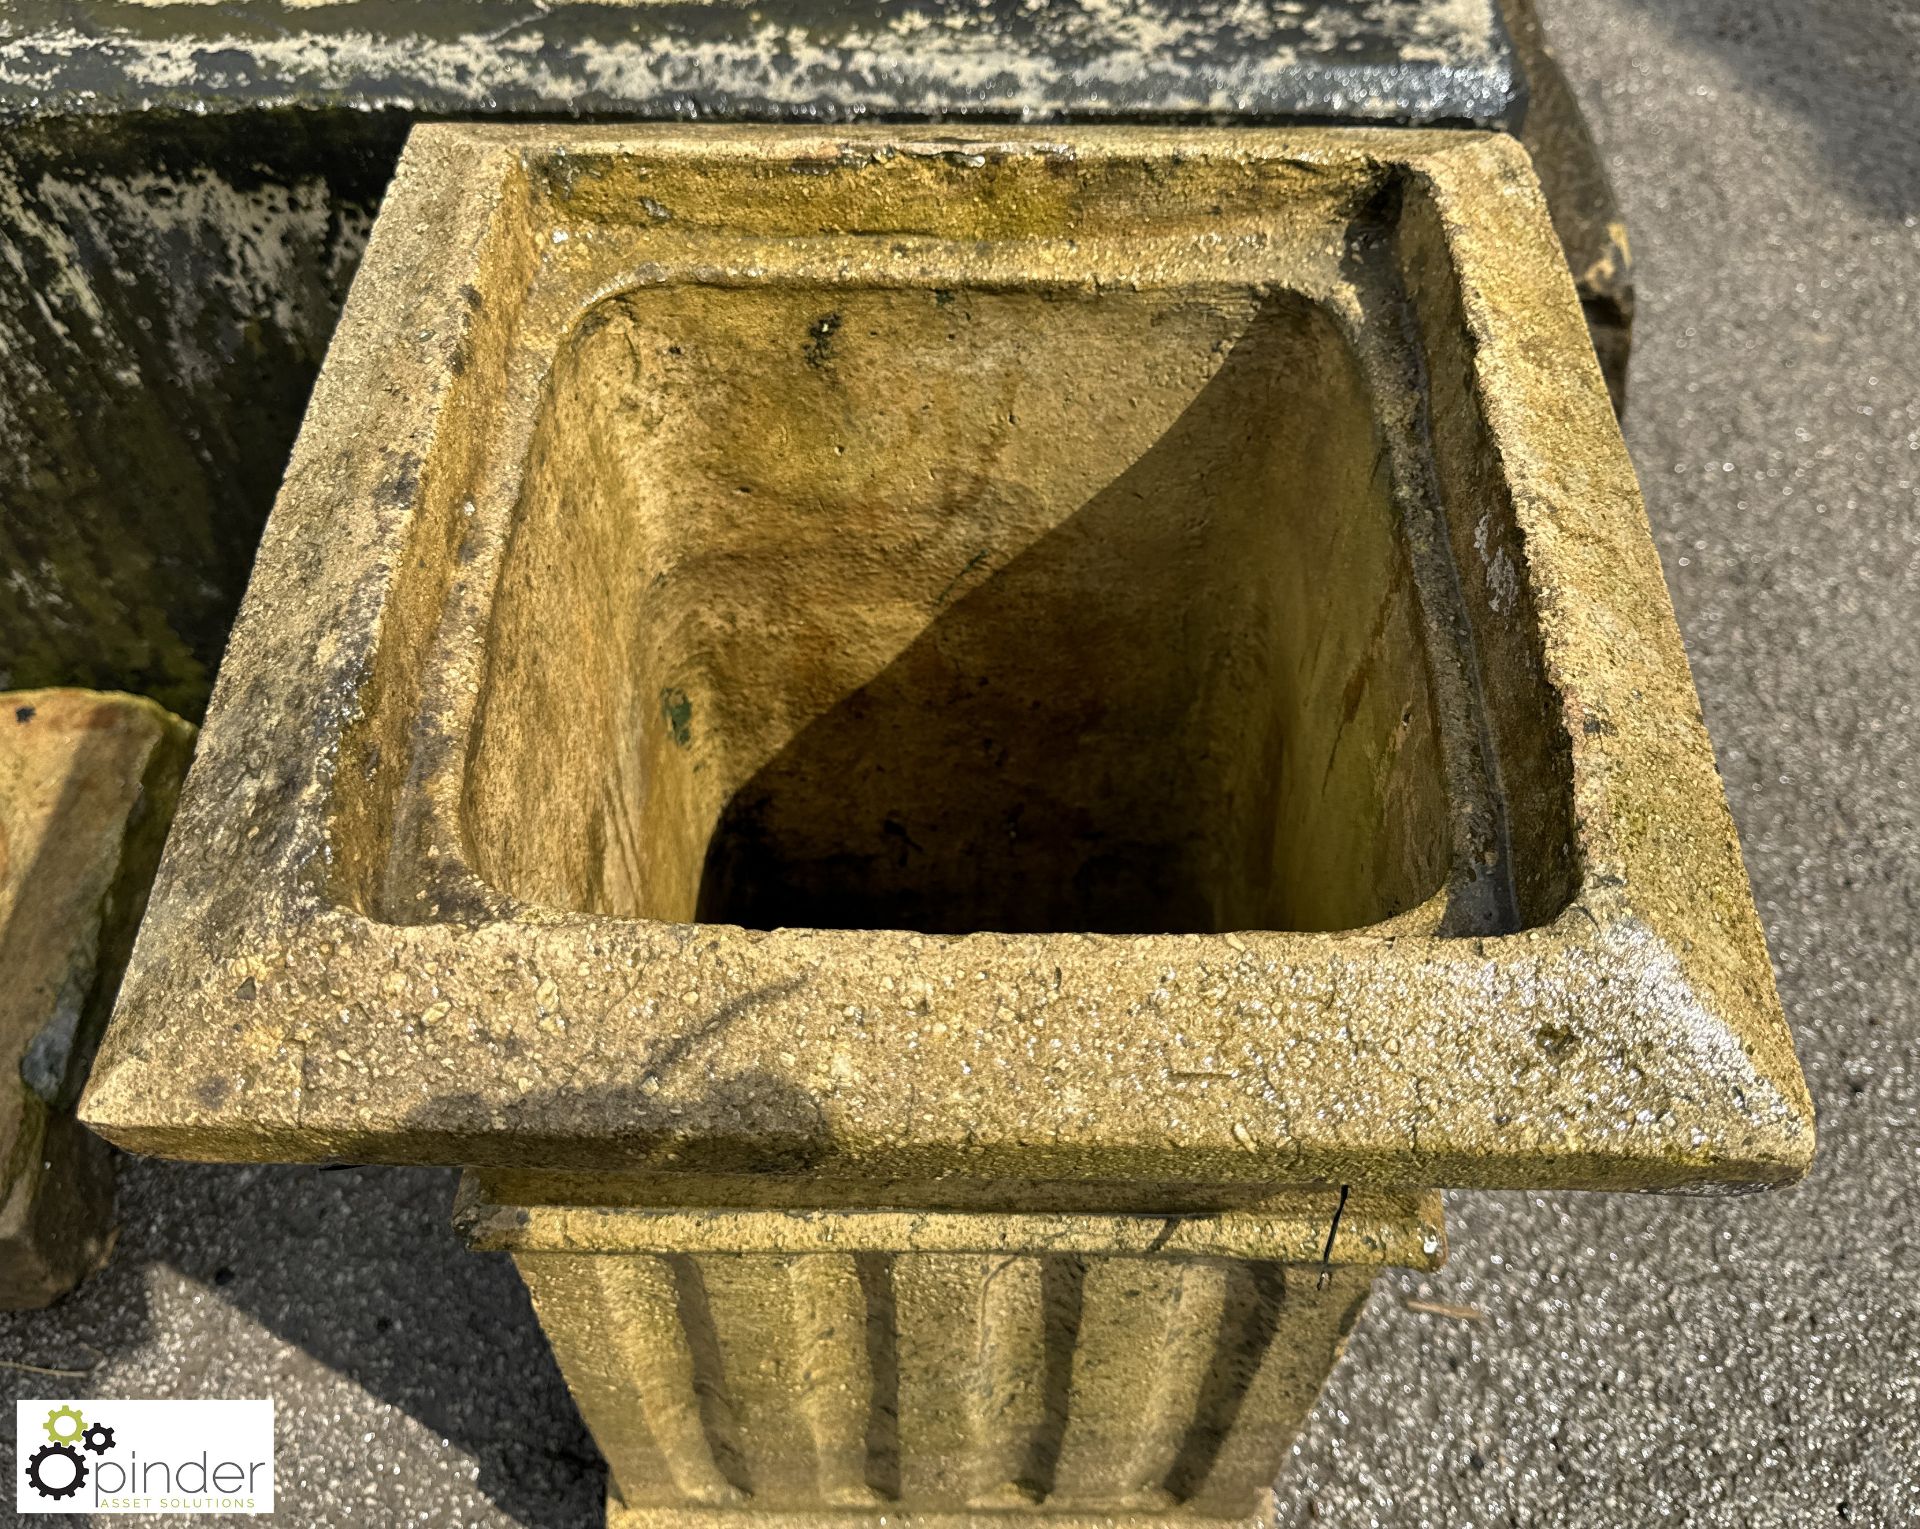 An Edwardian buff terracotta Chimney Pot, with fluted decorations, approx. 30in x 16in x 16in - Image 4 of 5